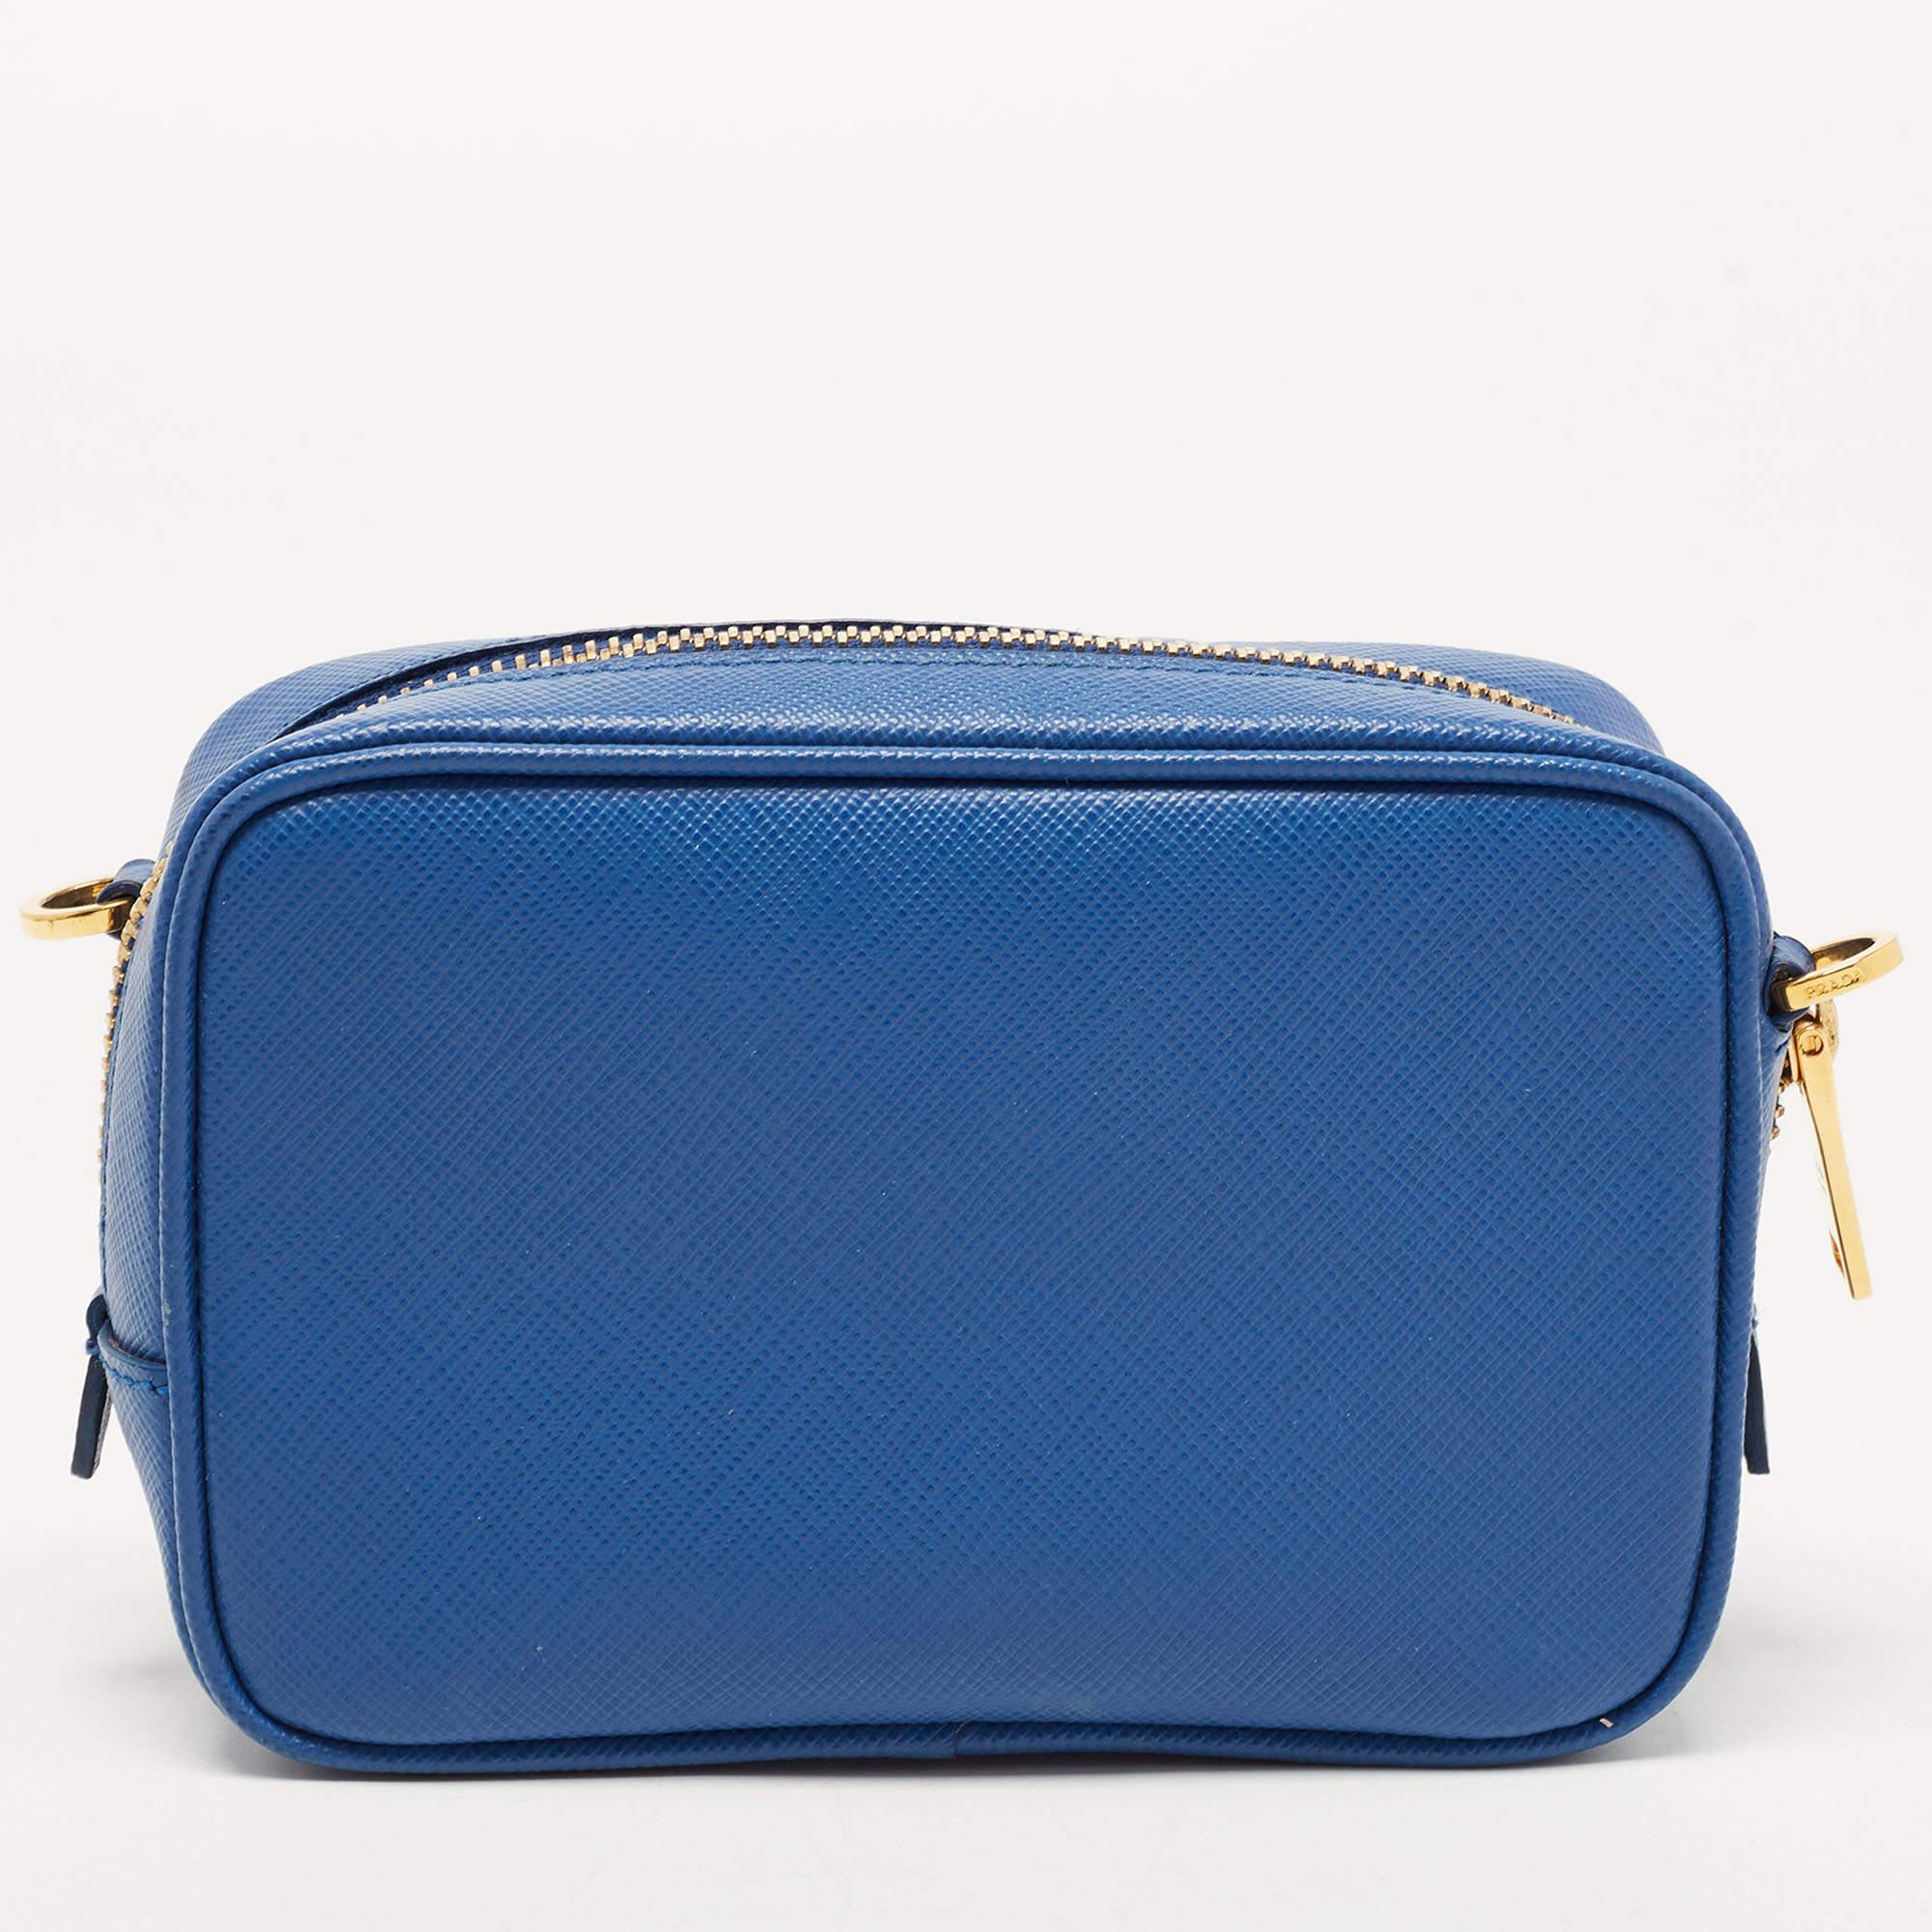 Designed to last, this beautiful crossbody bag is a smart buy. Comfortable and easy to carry, this handy creation comes with an interior lined to keep your essentials organized and safe.

